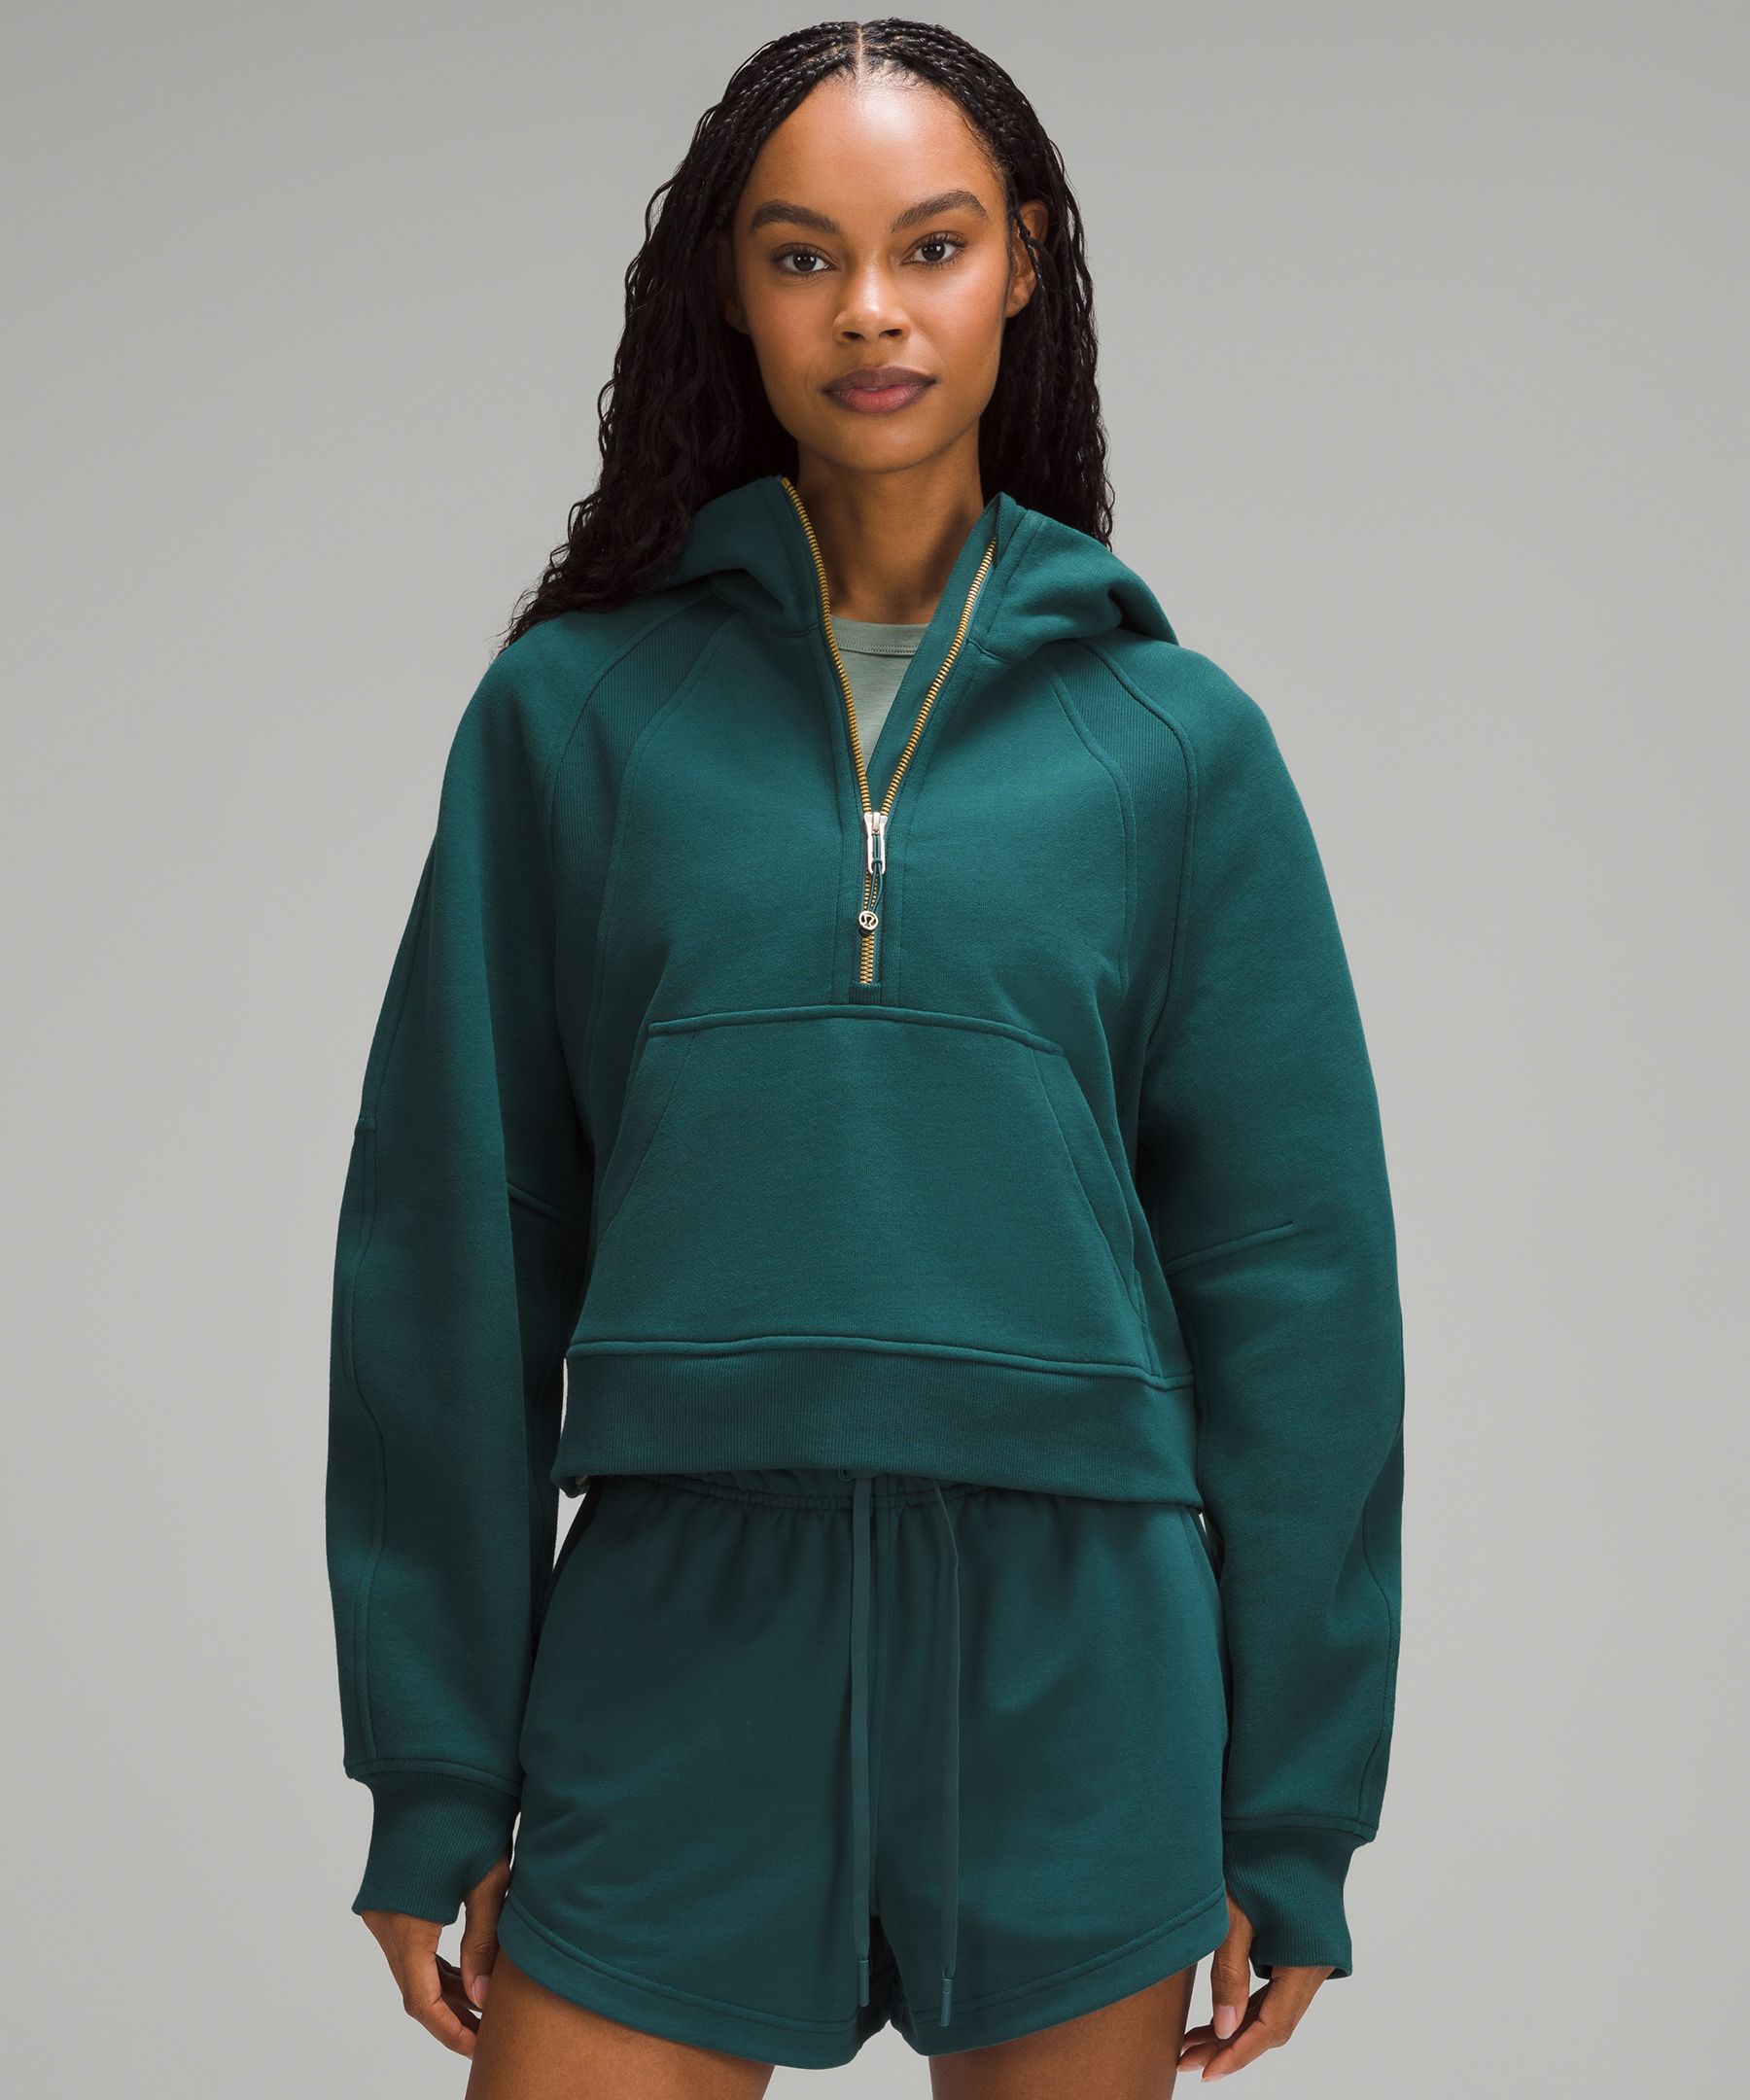 Scuba oversized half zip now have gold zippers in all colors. : r